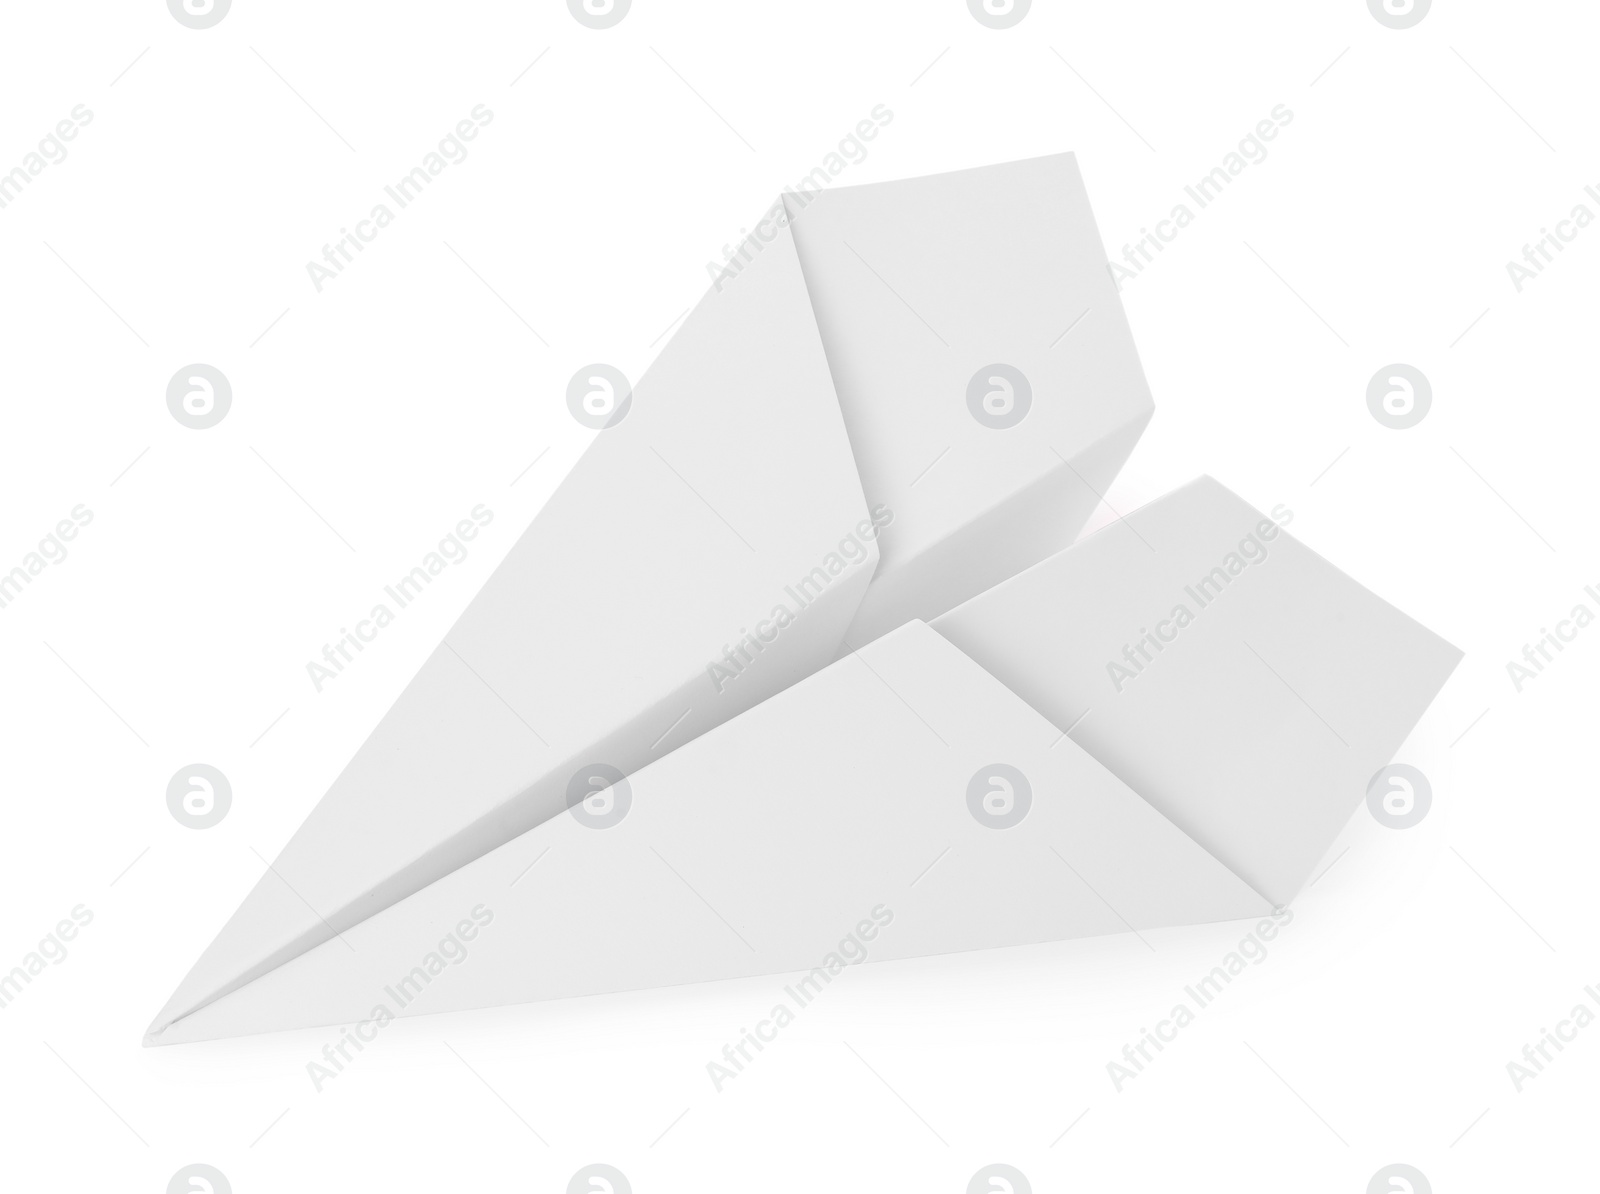 Photo of One handmade paper plane isolated on white